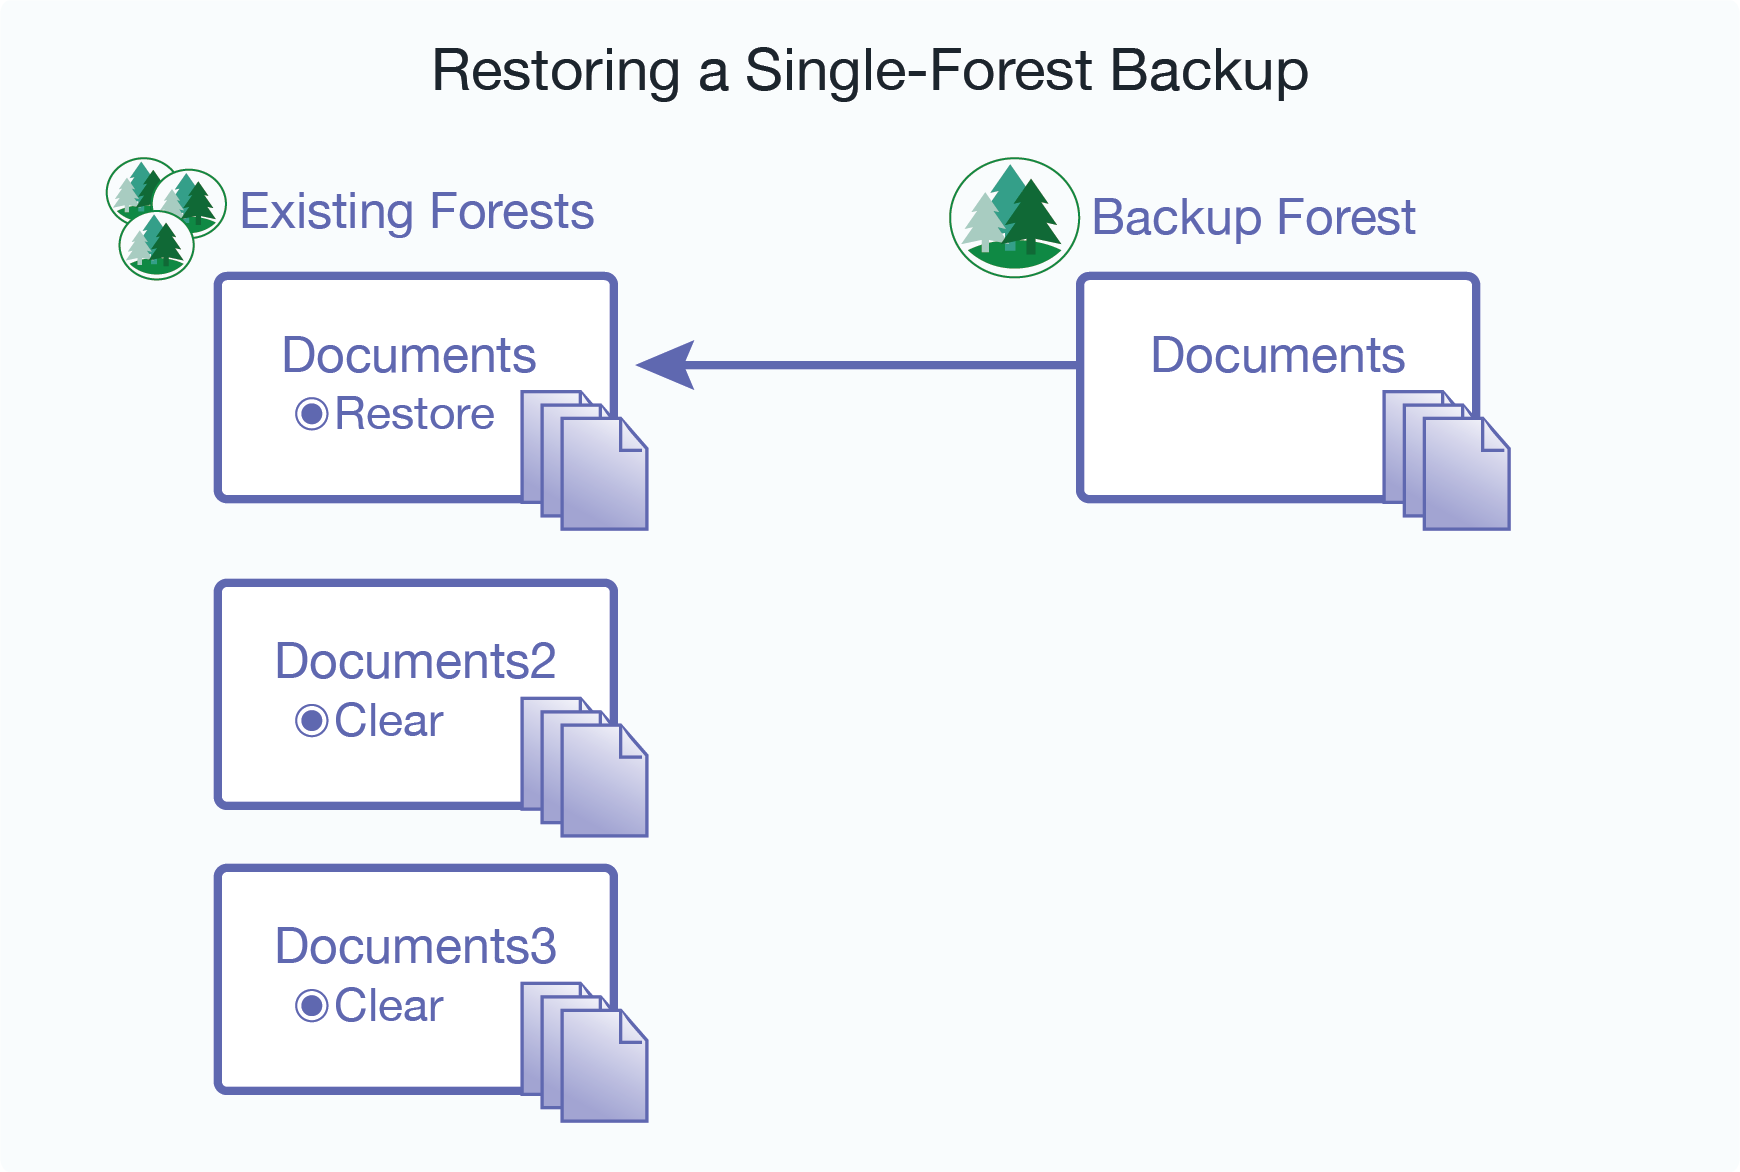 Graphic showing restoring the Documents forest from the backup of the Documents forest.